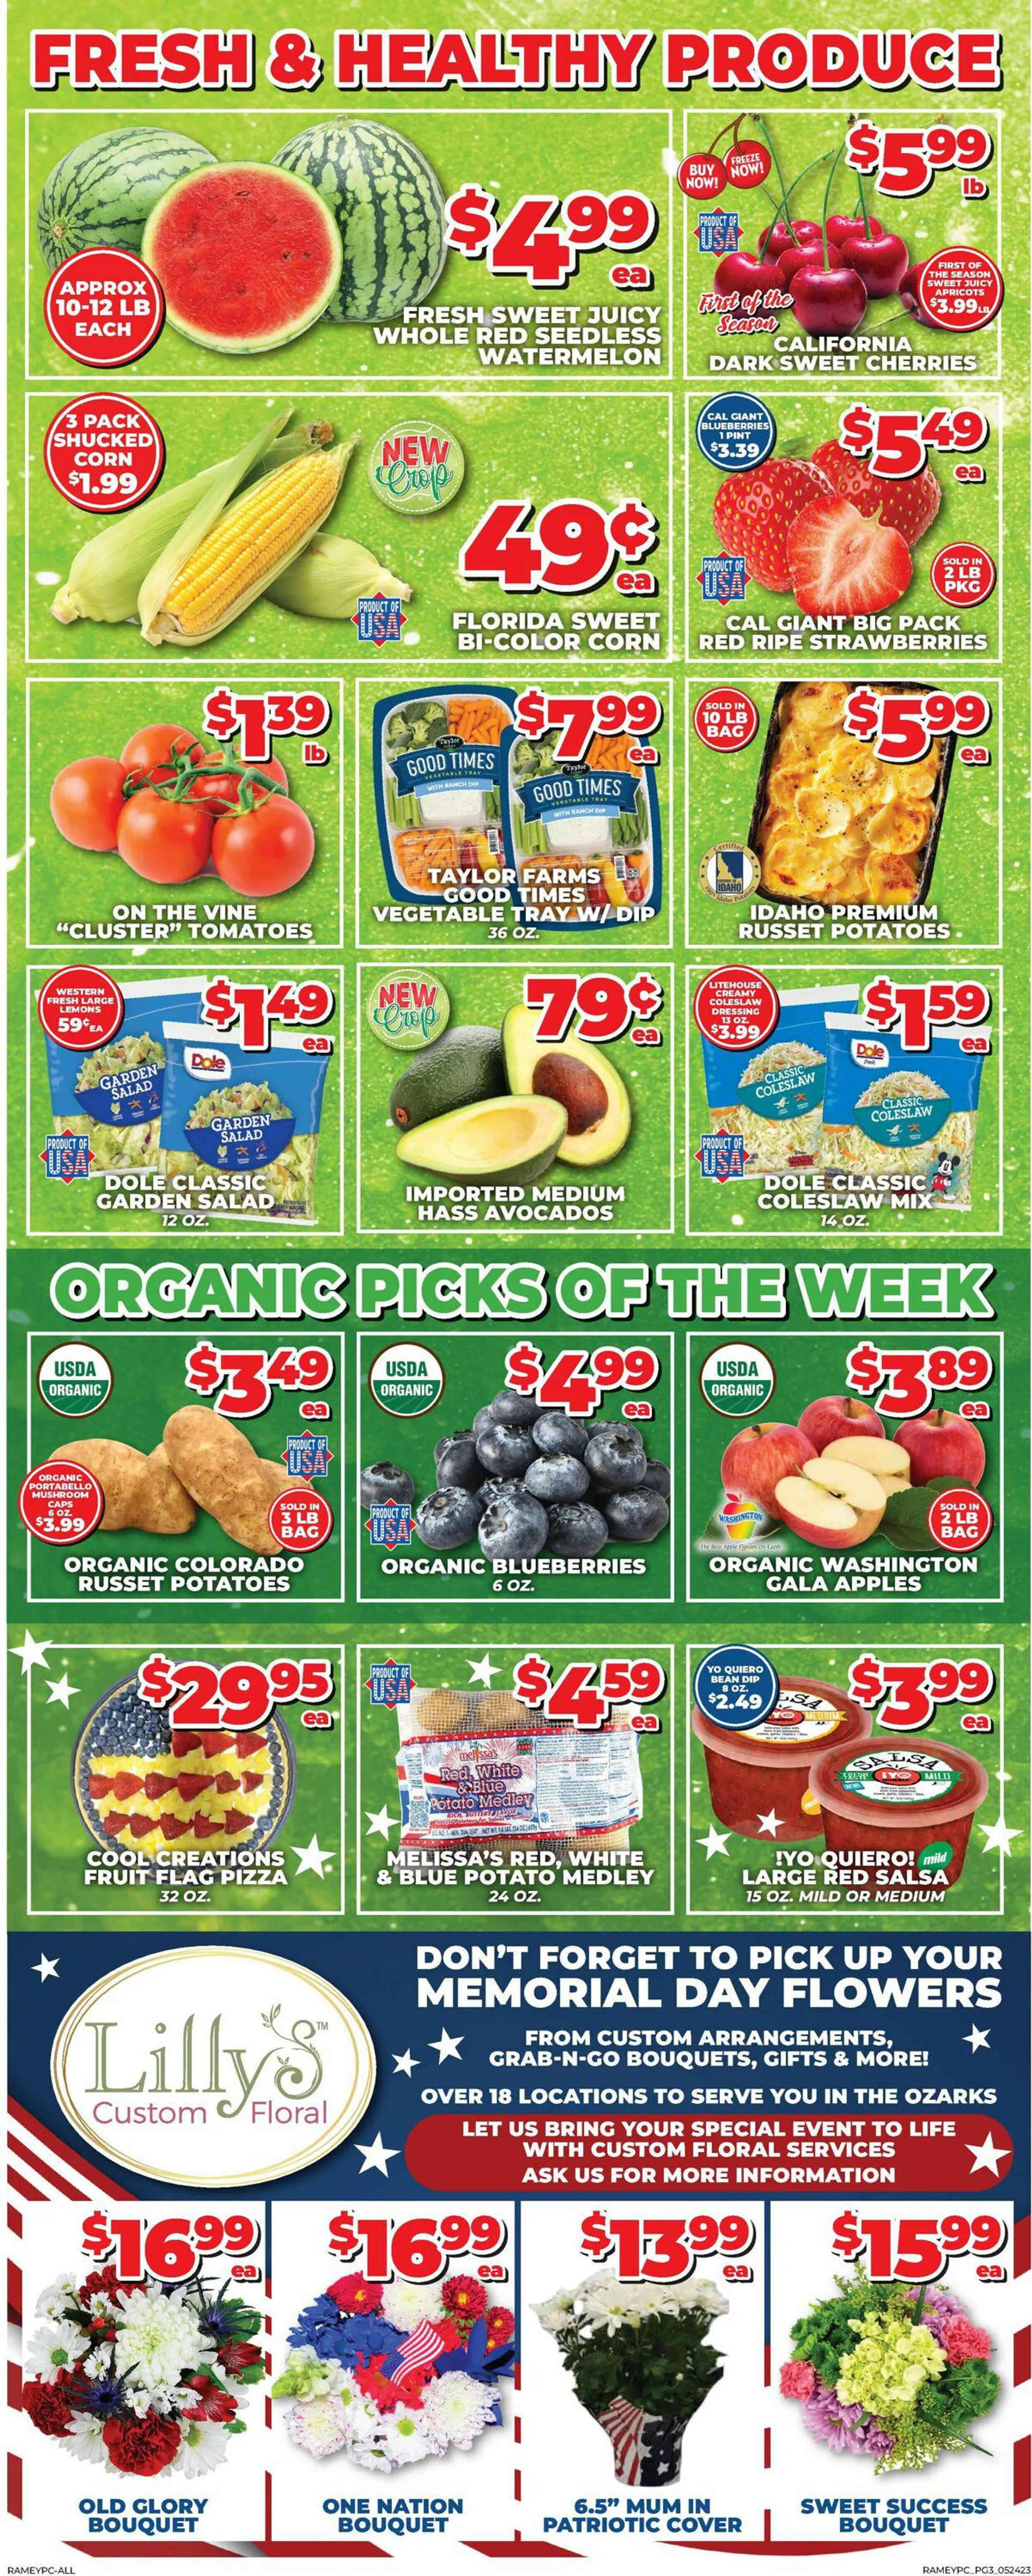 Price Cutter Current weekly ad - 3